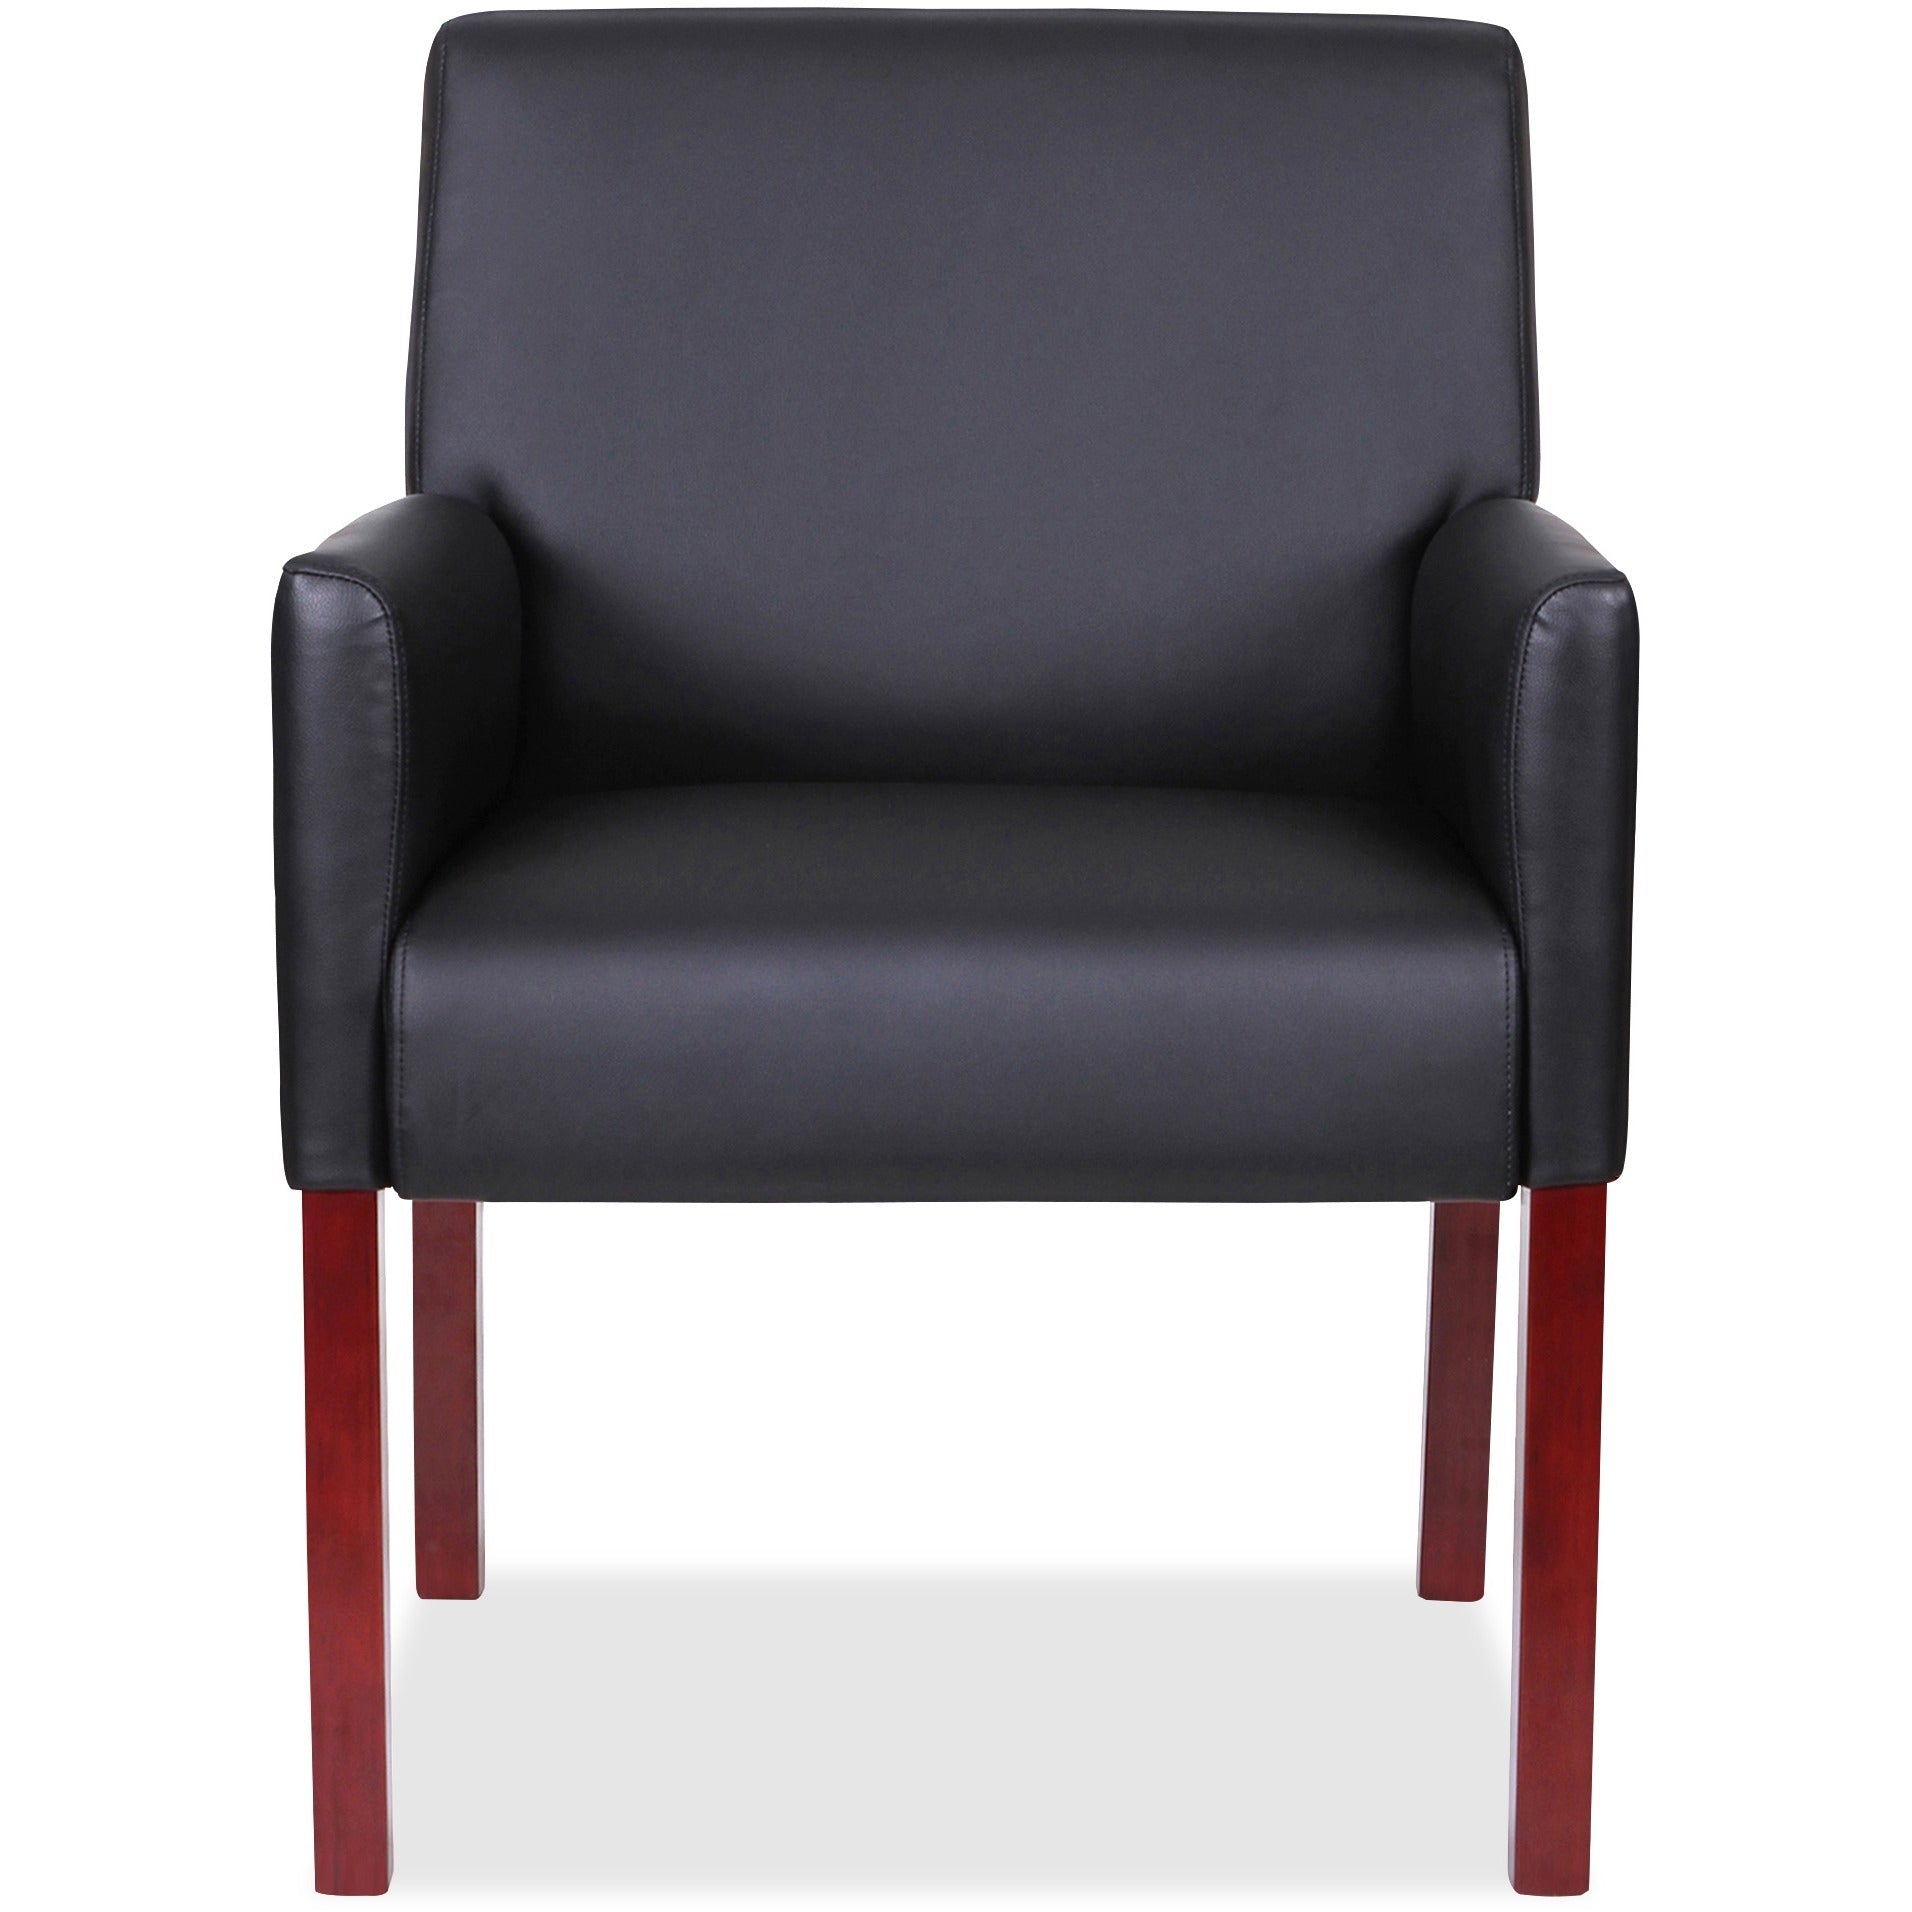 lorell-full-sided-upholstered-arms-guest-chair-black-leather-seat-black-leather-back-mahogany-wood-frame-1-each_llr20027 - 2